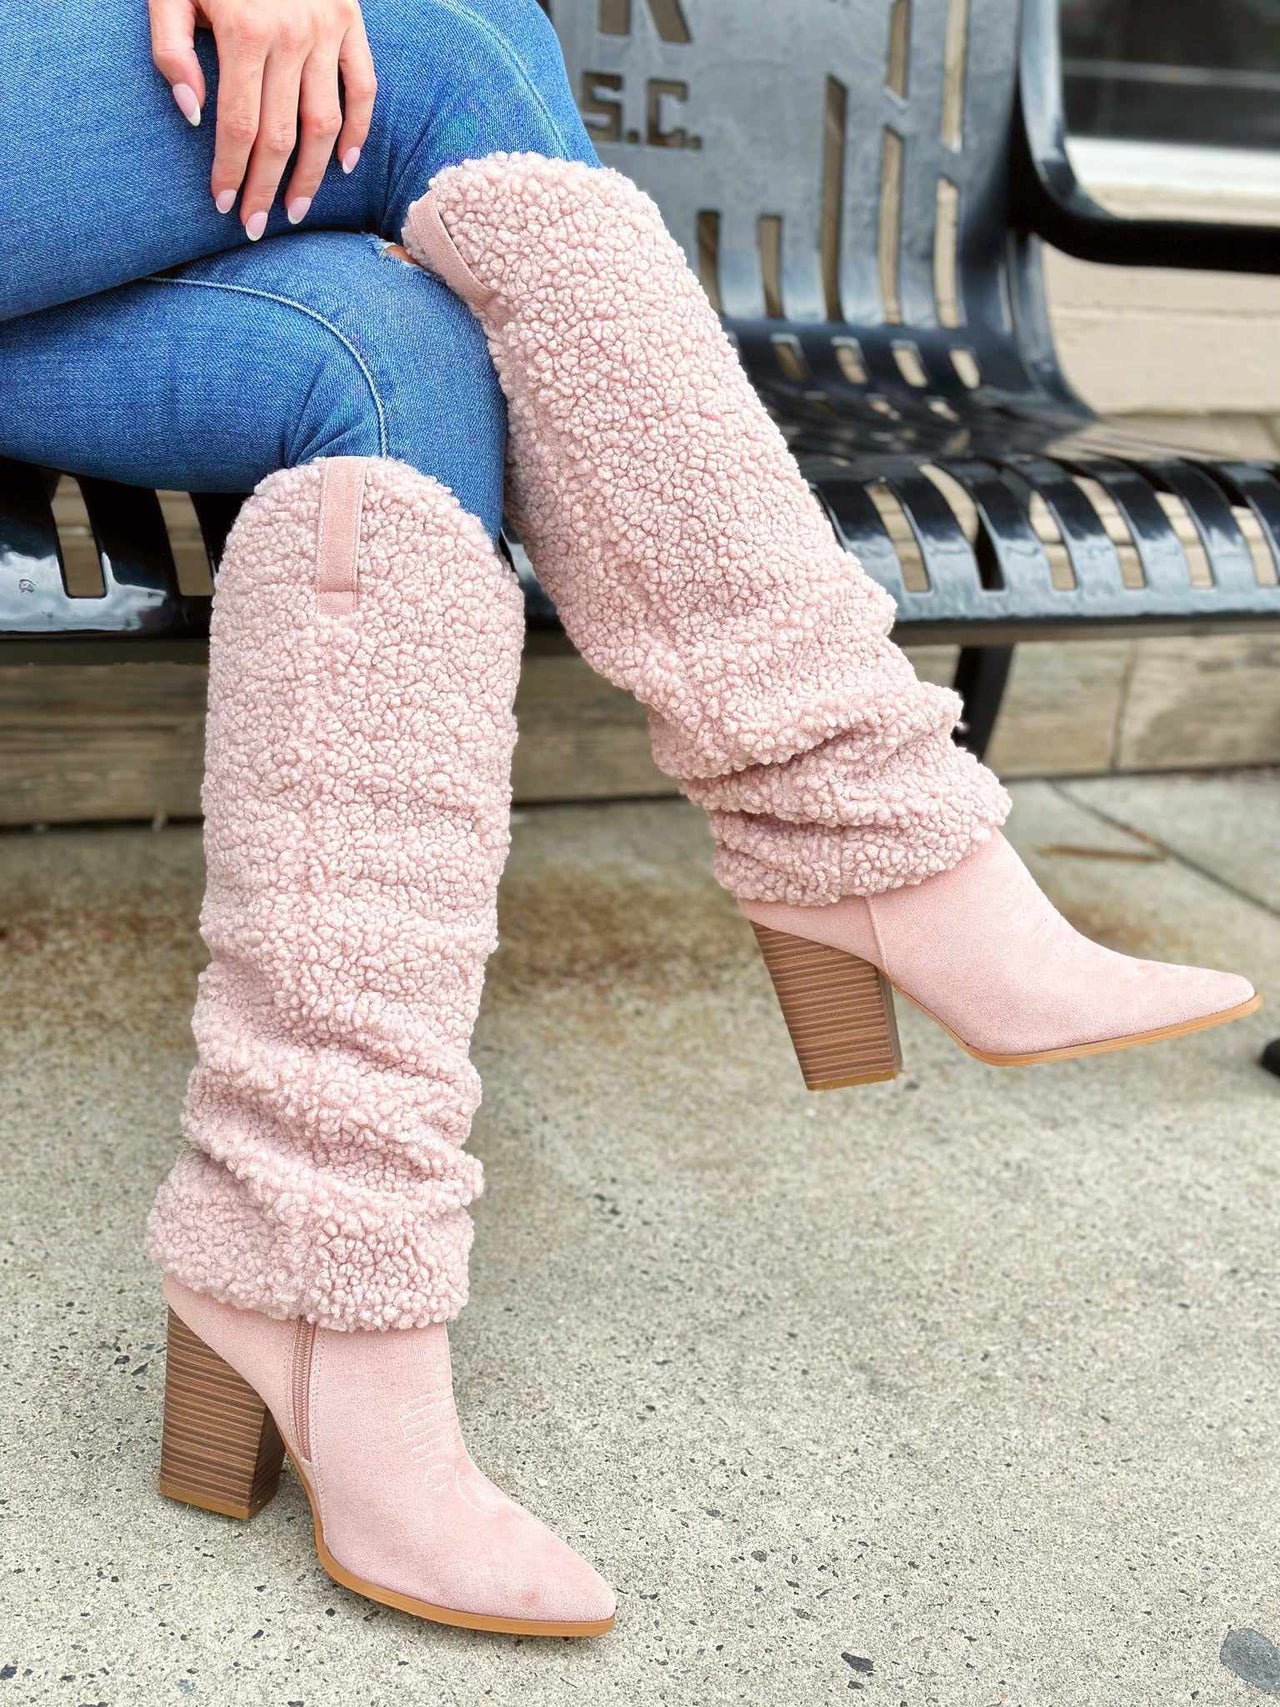 Pastel pink Sherpa knee high boots with heel.